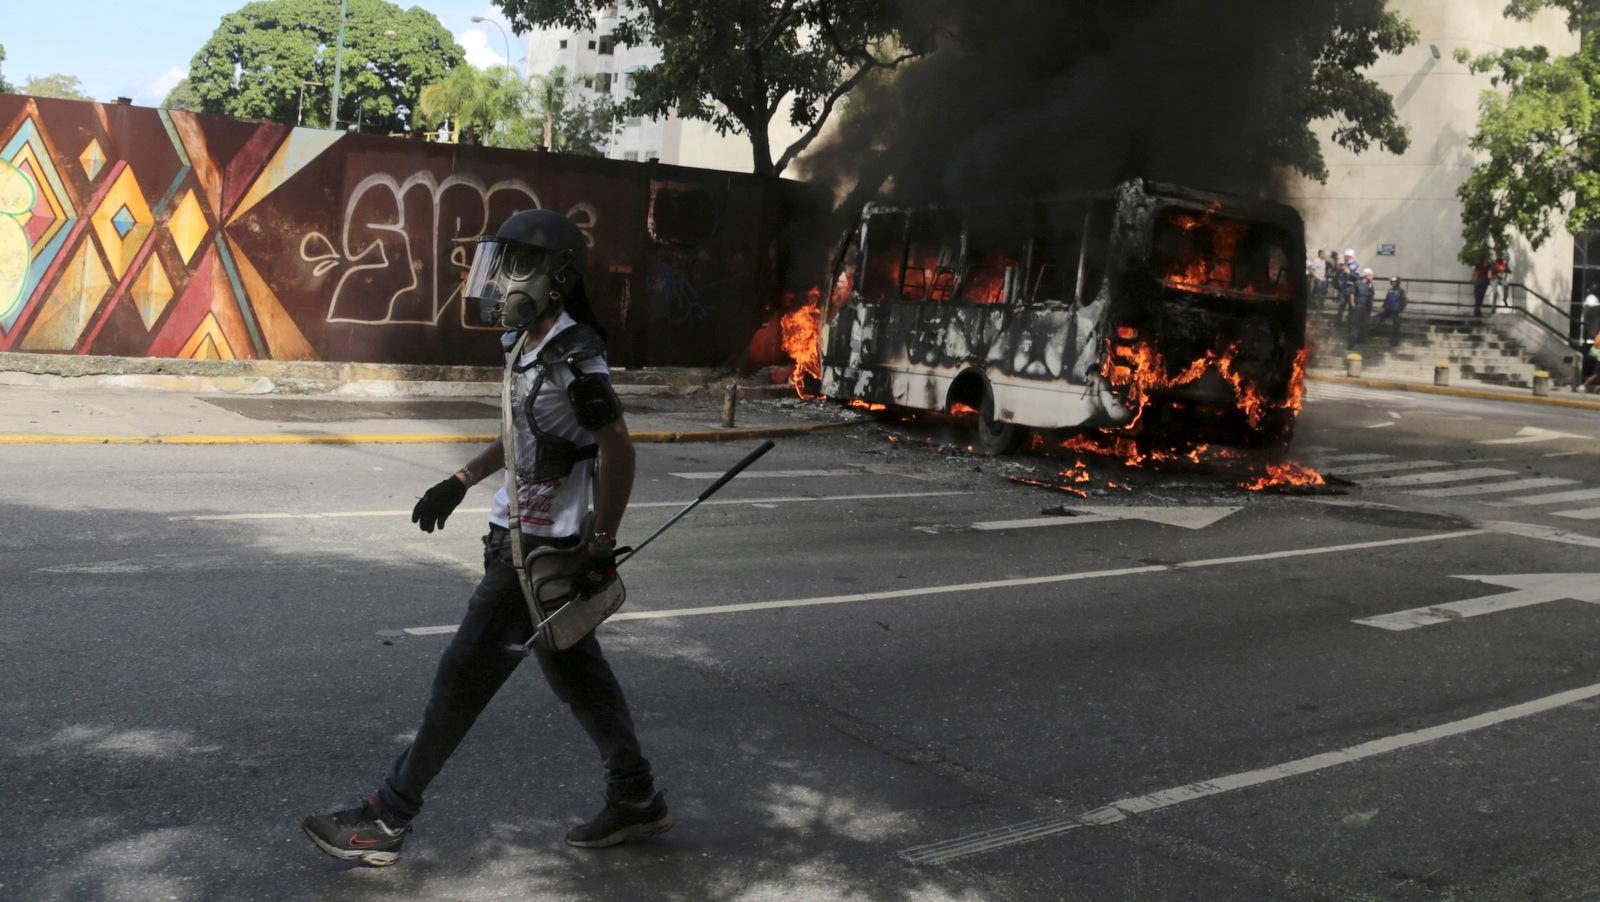 A protester wearing a gas mask and carrying a golf club walks to join fellow protesters, past a burning public transportation bus in Caracas, Venezuela, May 13, 2017. The anti-government protest movement that has drawn masses of people into the streets nearly every day since March, continued on Saturday. (AP/Fernando Llano)